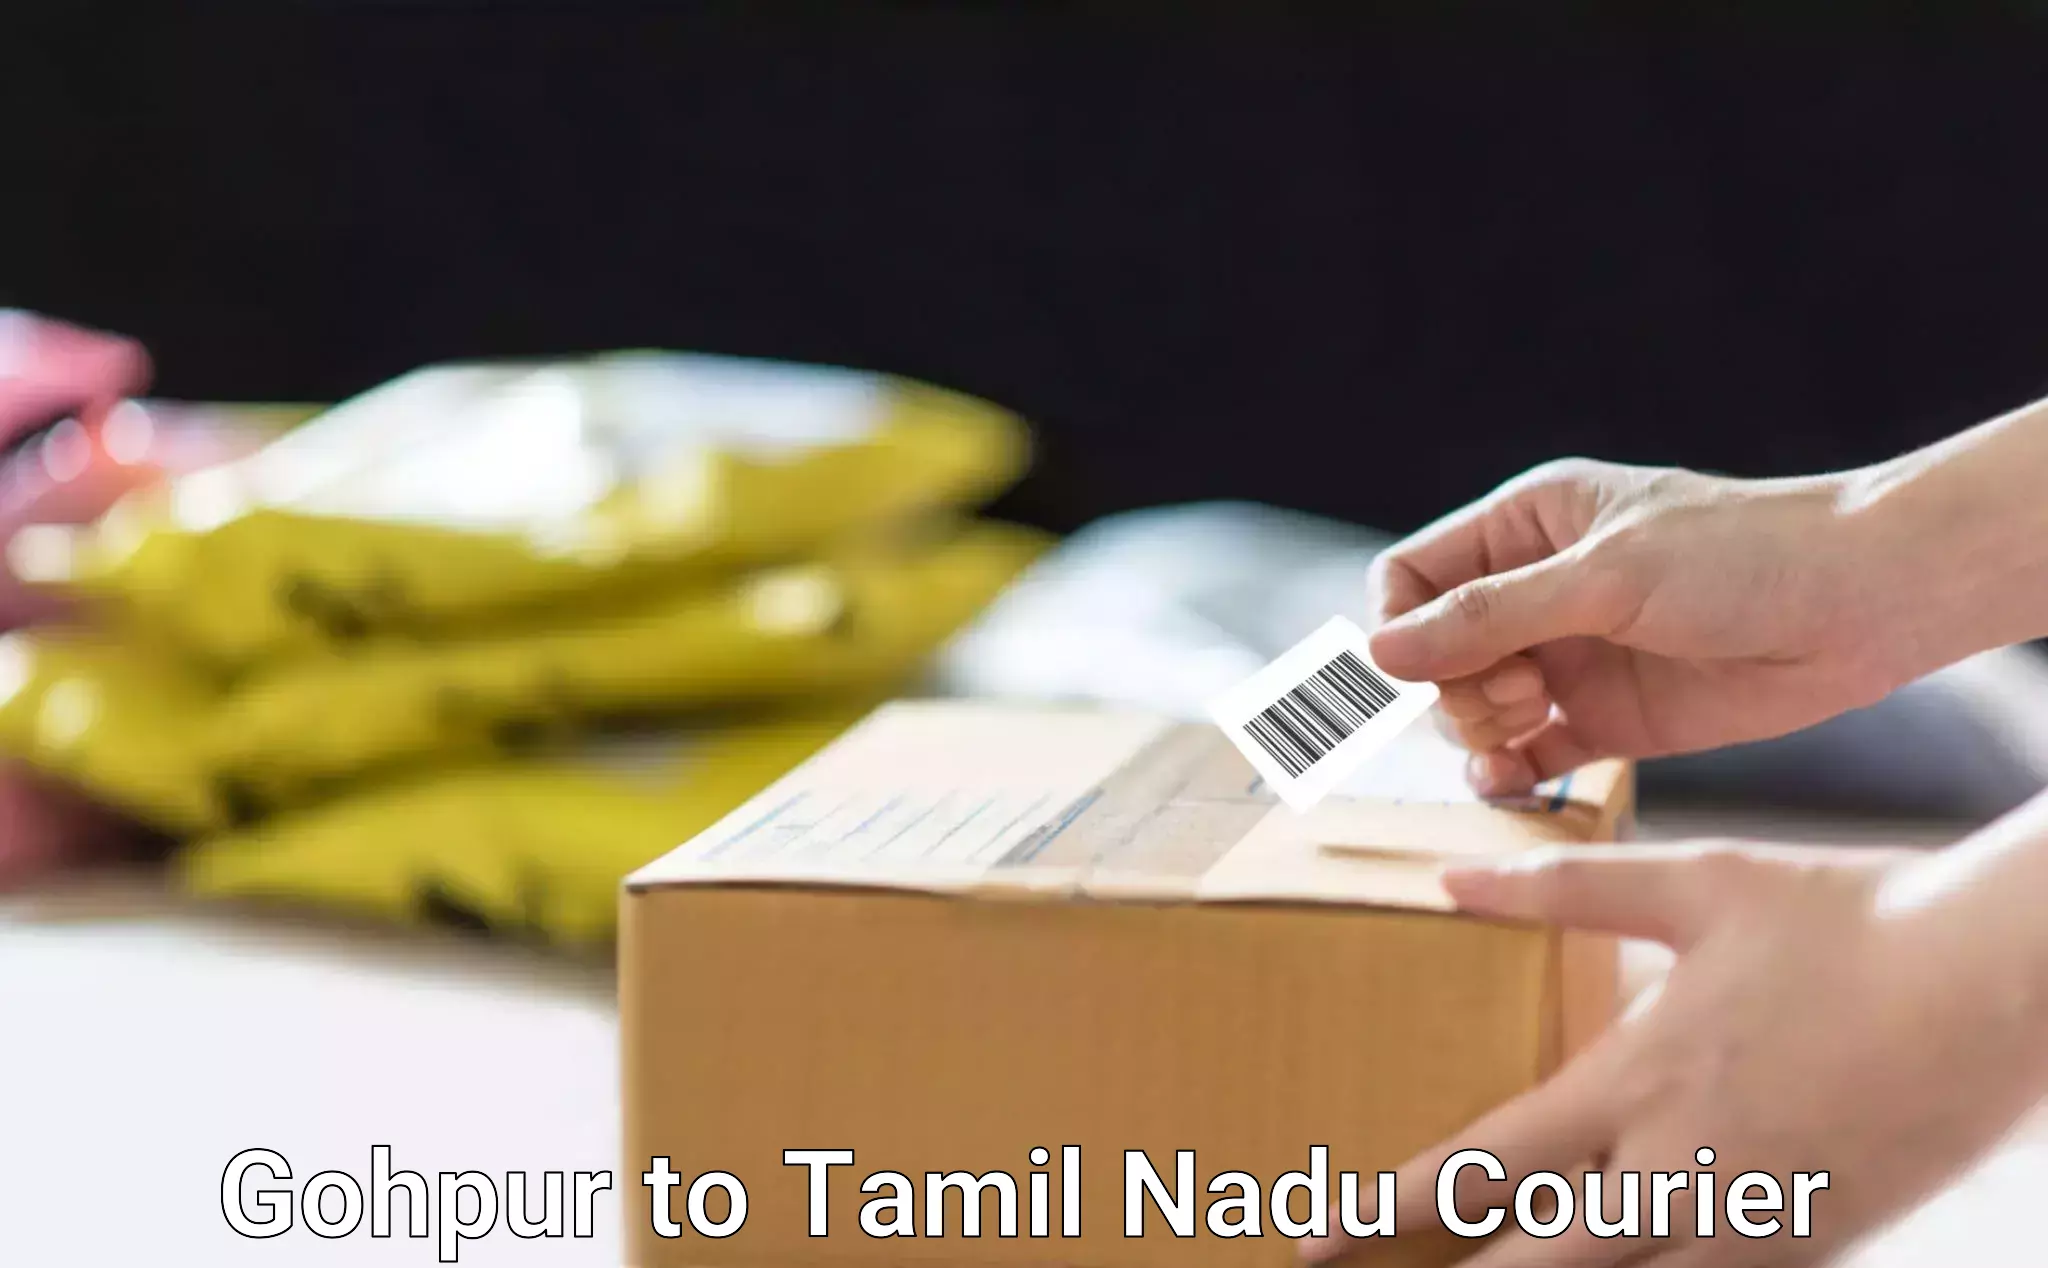 Custom courier packages Gohpur to Chennai Port